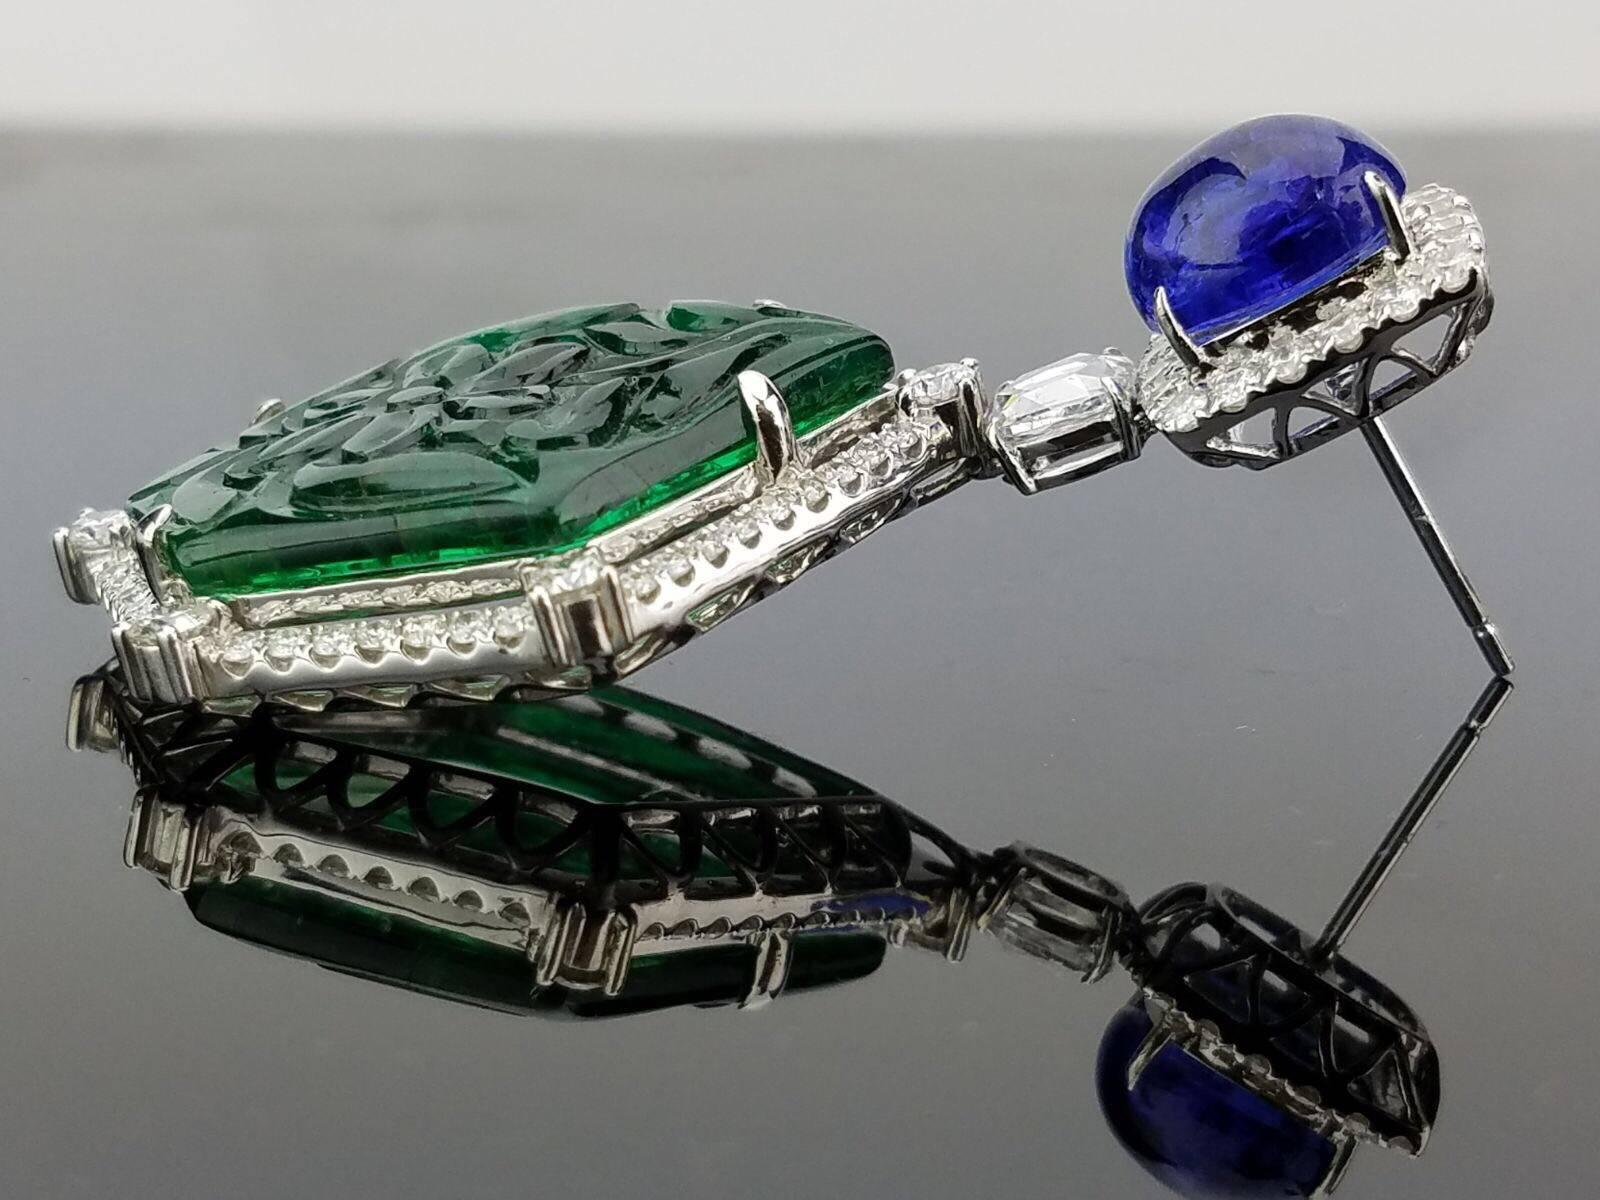 A pair of very unique high quality carved Zambian Emerald and Tanzanite cabochon earrings, with brilliant cut and rose cut Diamonds. 

Stone Details: 
Stone: Zambian Emerald
Cut: Fancy, Carving
Carat Weight: 29.69

Diamond Details:
Cut: Rose cut,